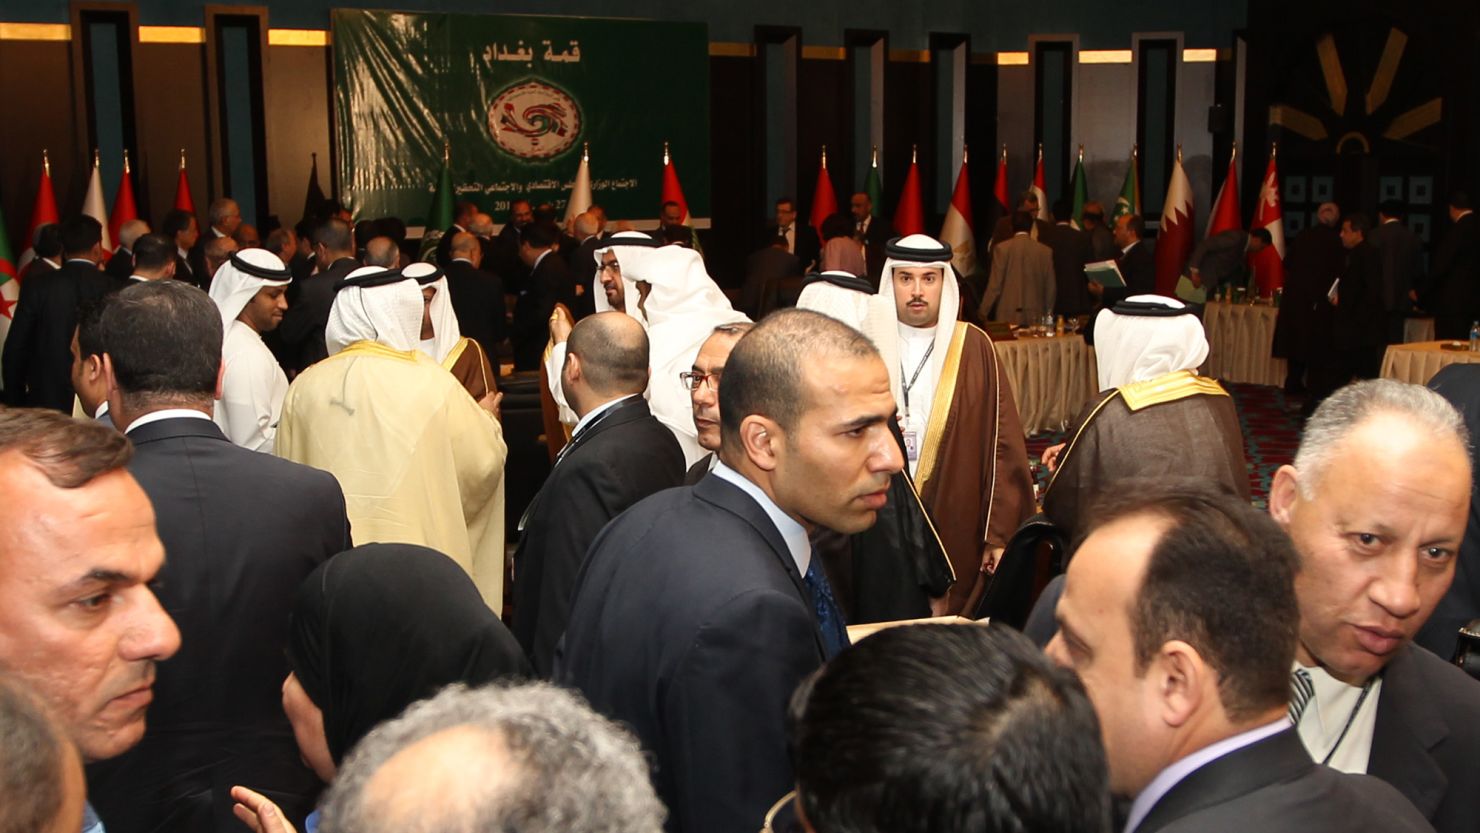 Leaders attend the Arab economy, finance and trade ministers meeting as part of Arab League Summit on Tuesday in Baghdad.